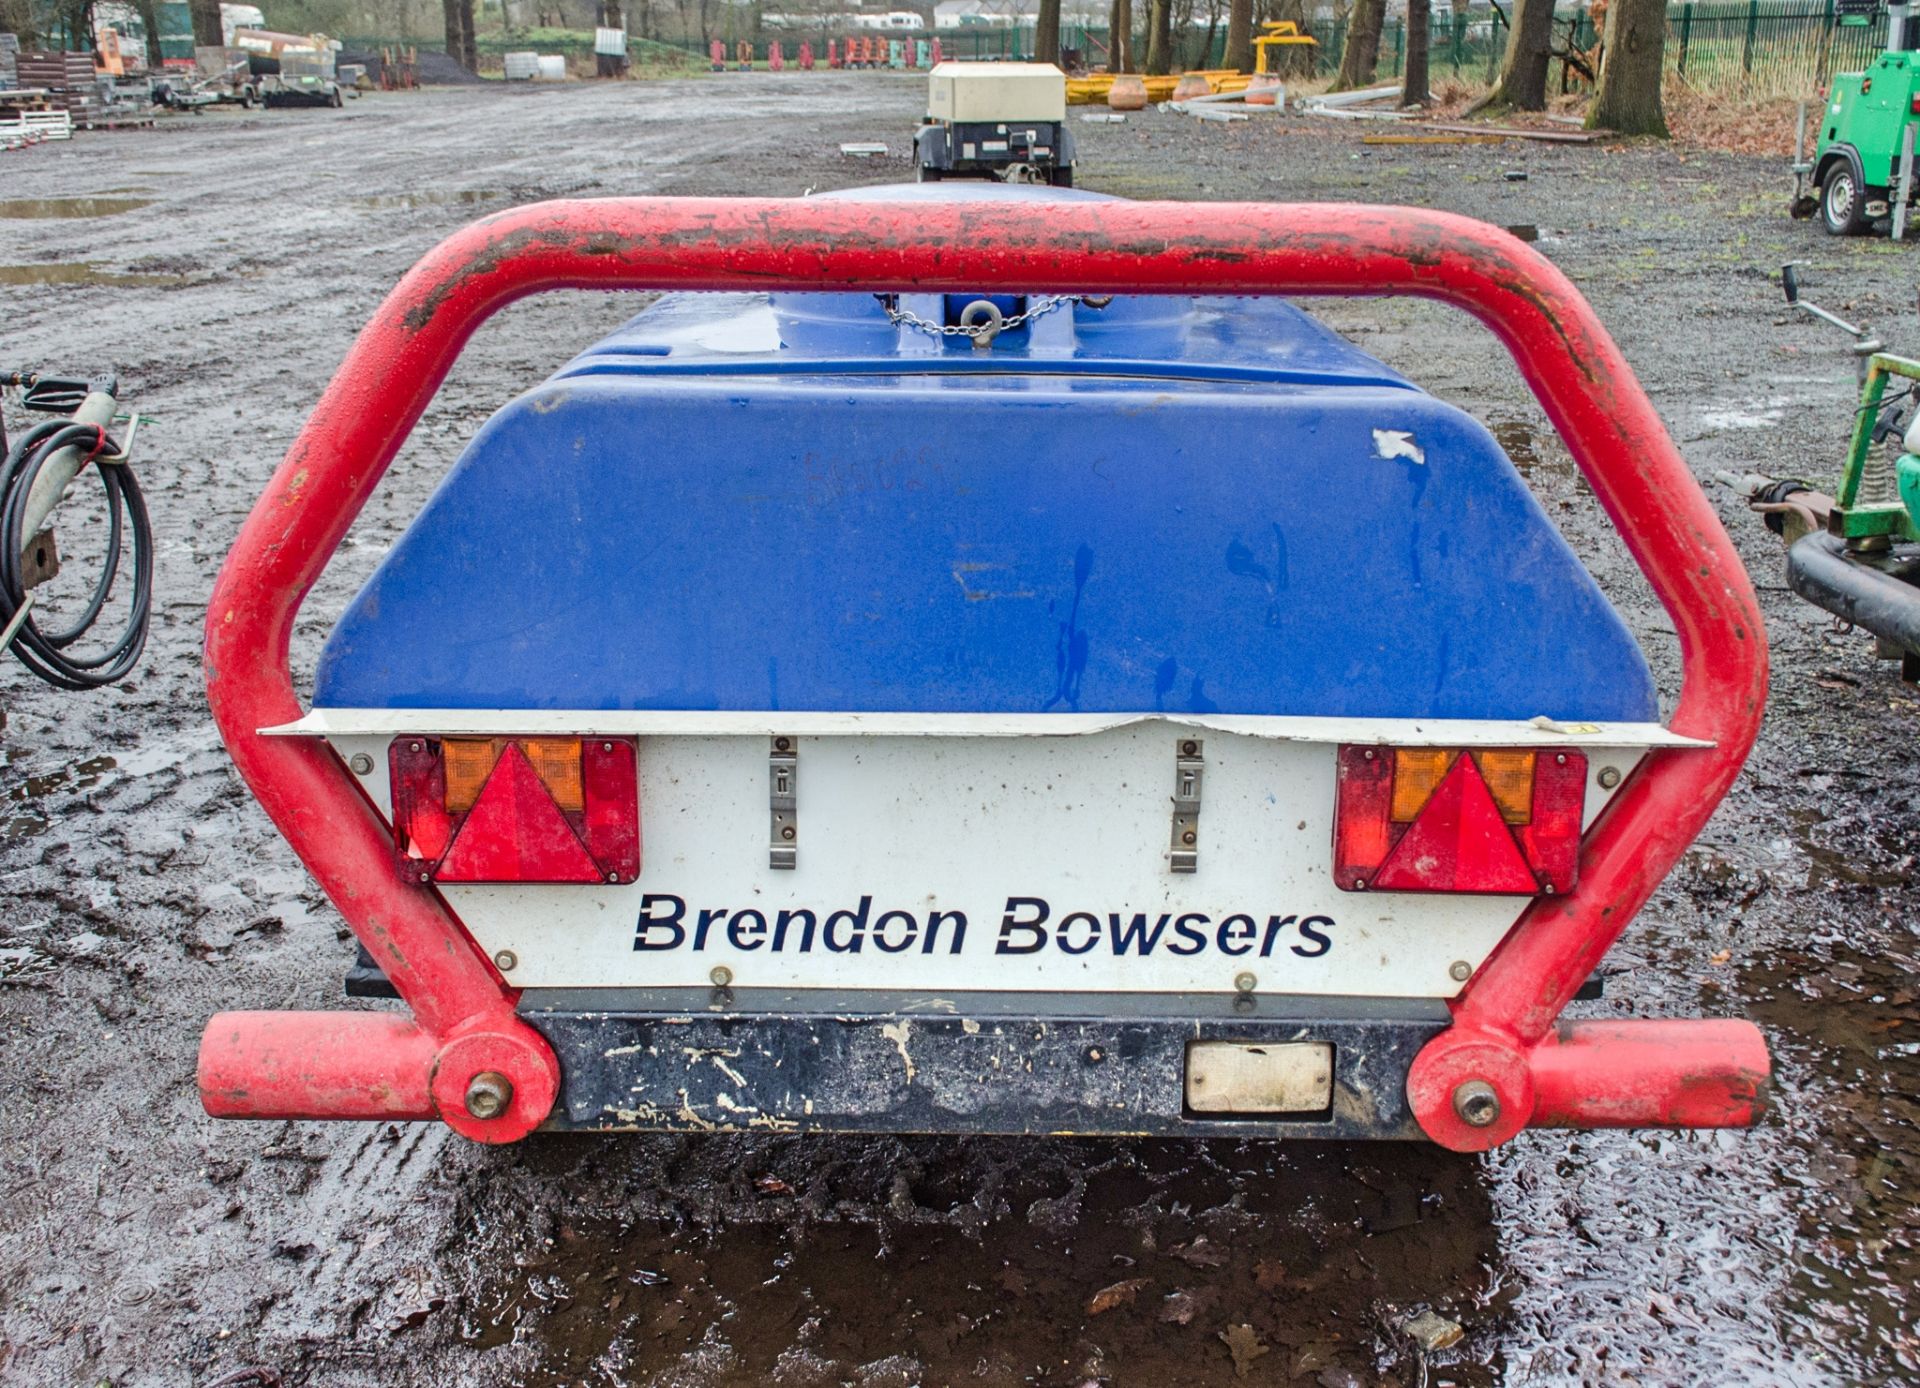 Brendon Bowsers diesel driven fast tow mobile pressure washer bowser c/w lance ** Pull cord and - Image 4 of 5